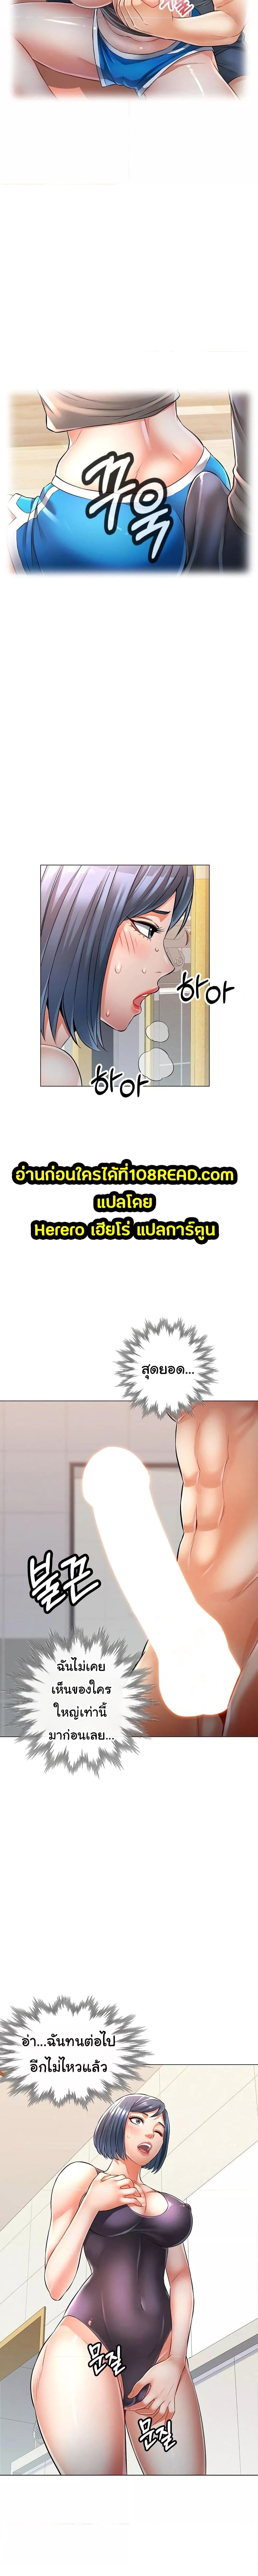 In Her Place ตอนที่ 4 ภาพ 9